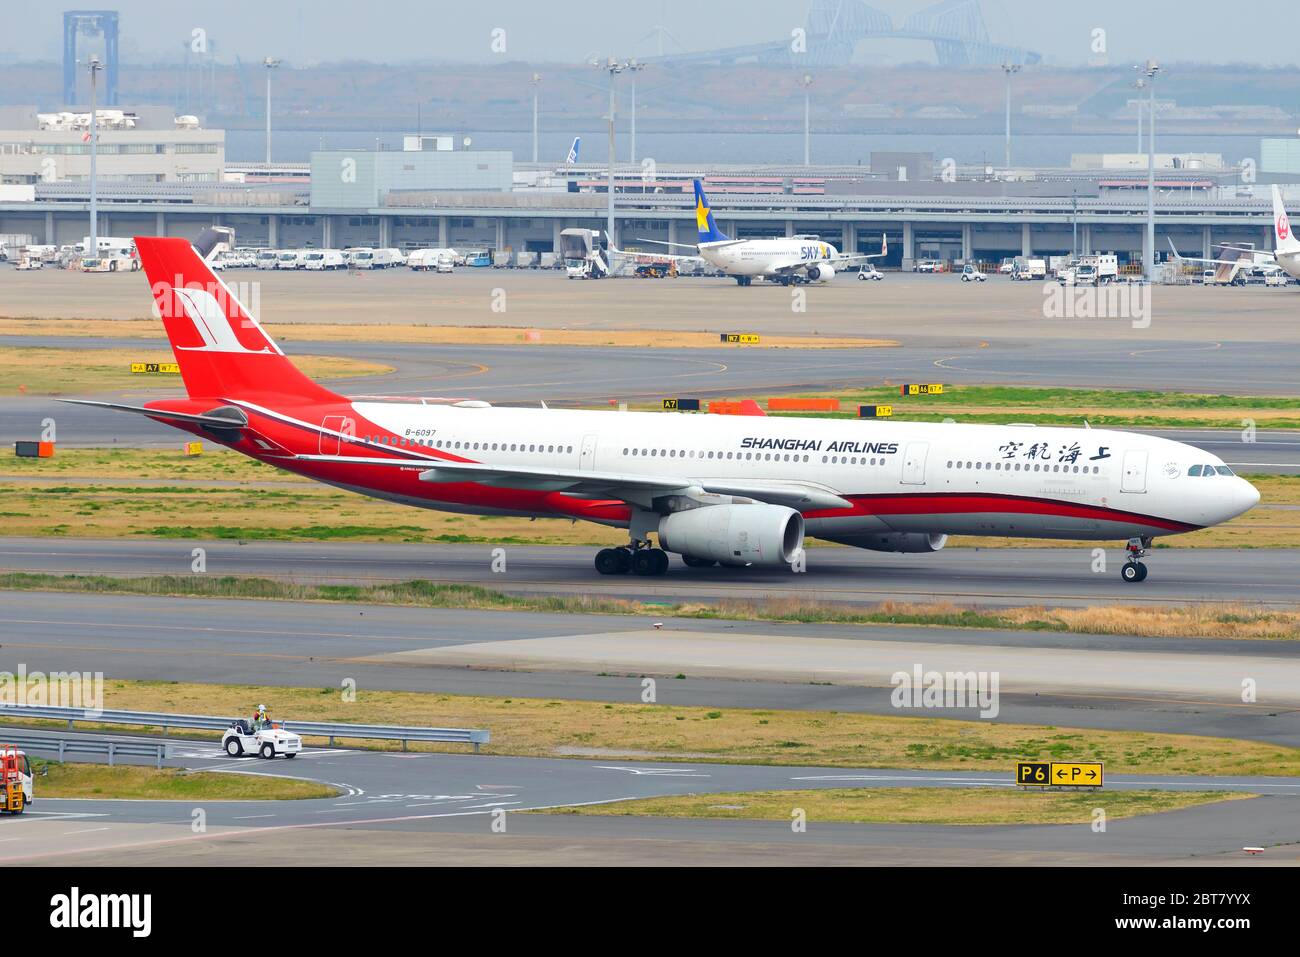 Shanghai Airlines Airbus A330 inbound from Shanghai Pudong Airport. A330-300 B-6097 aircraft taxiing at Haneda International Airport. Chinese airline. Stock Photo